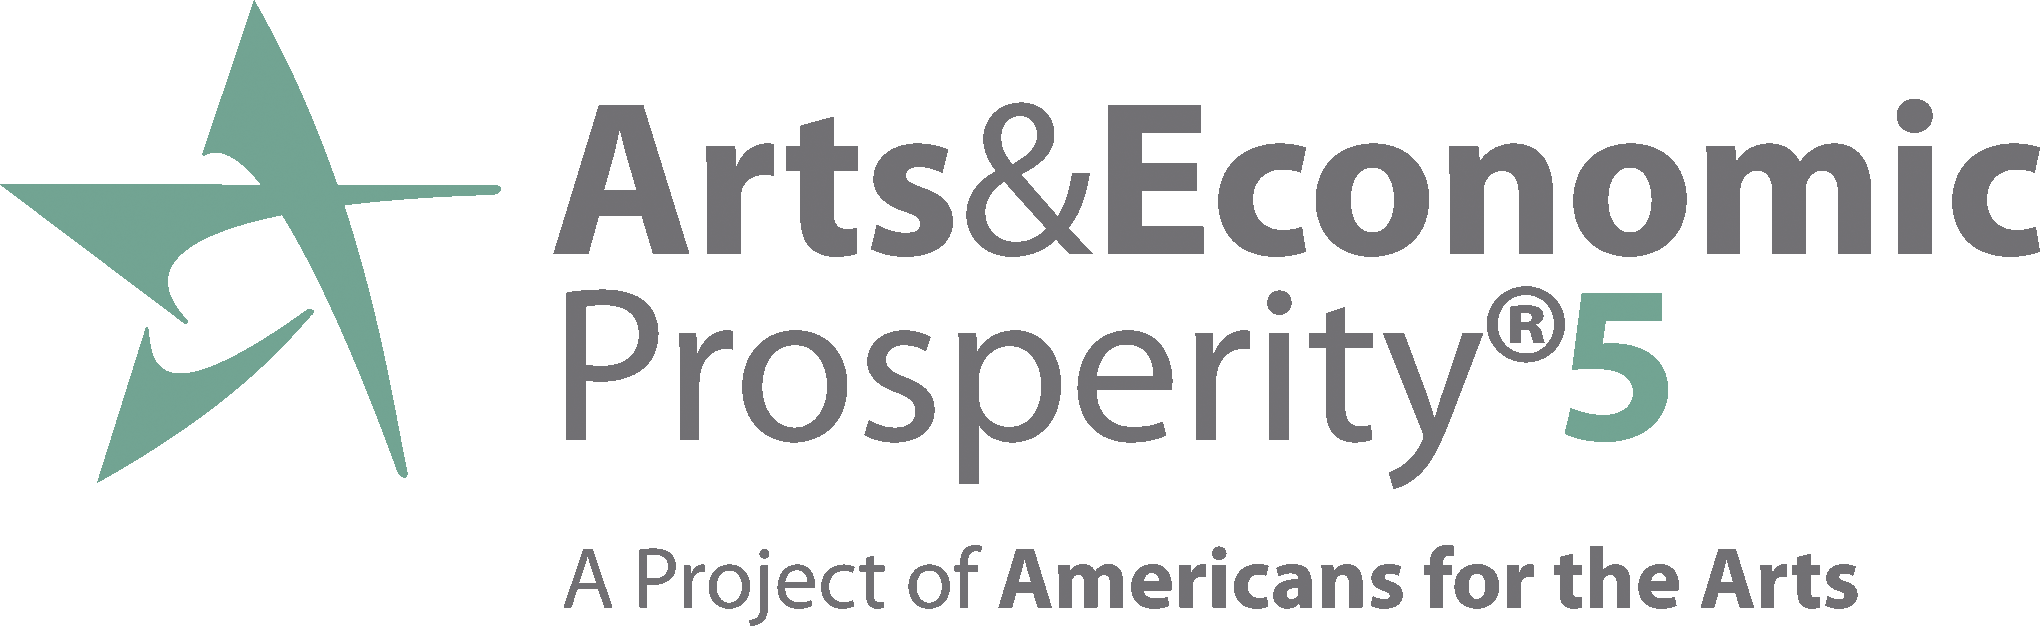 Arts & Economic Prosperity® 5 A Project of Americans for the Arts